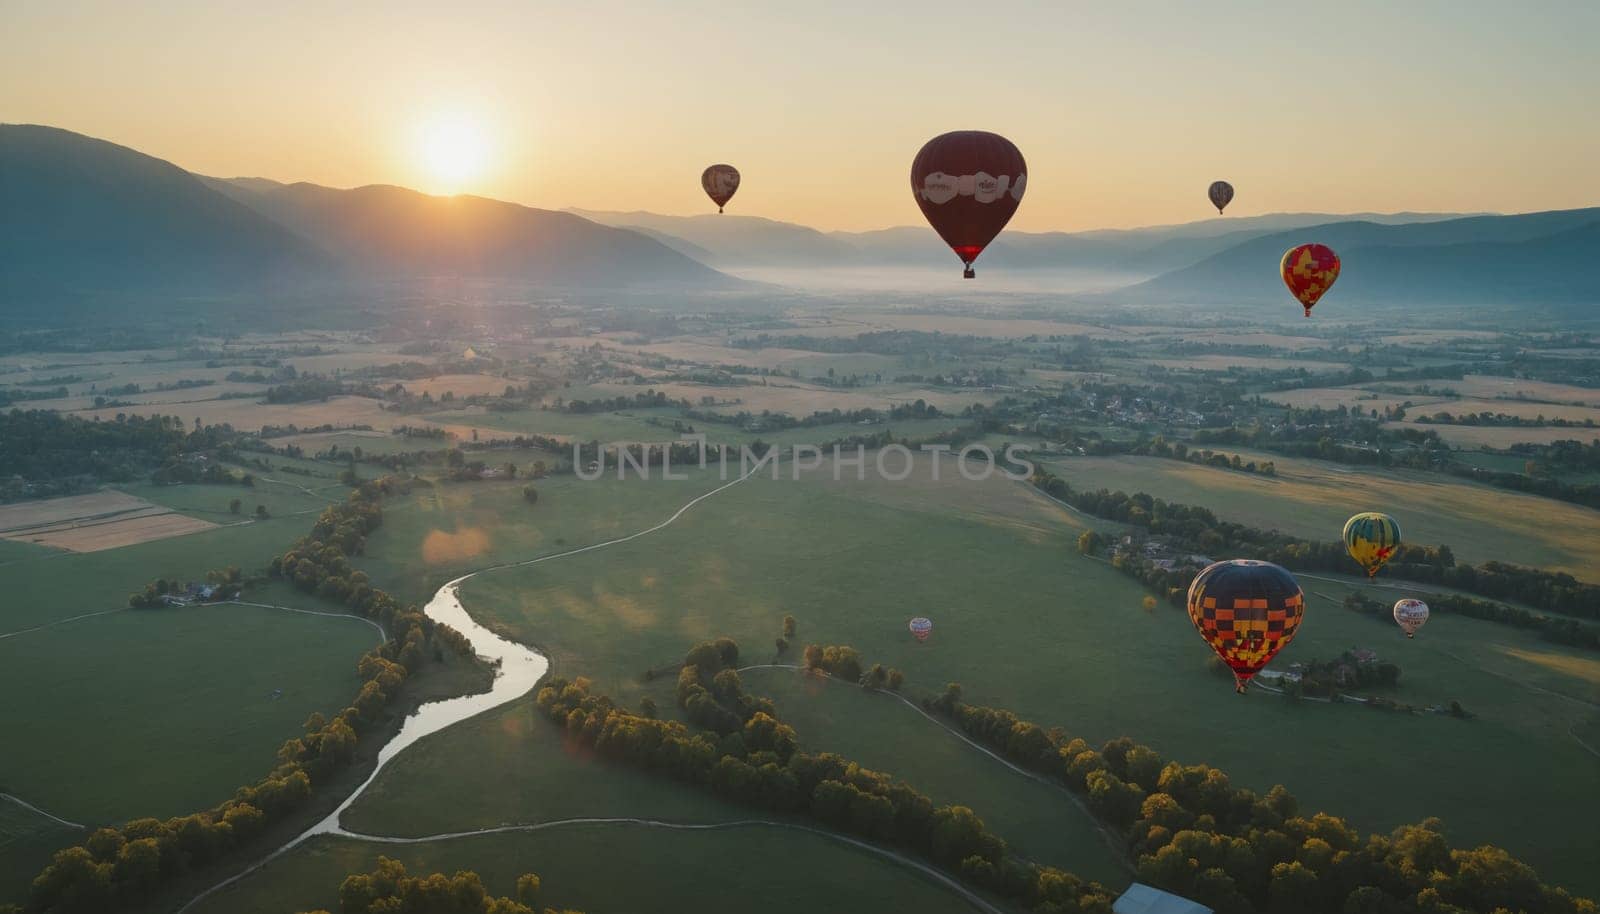 Colored hot air balloons float over a beautiful landscape by Andre1ns